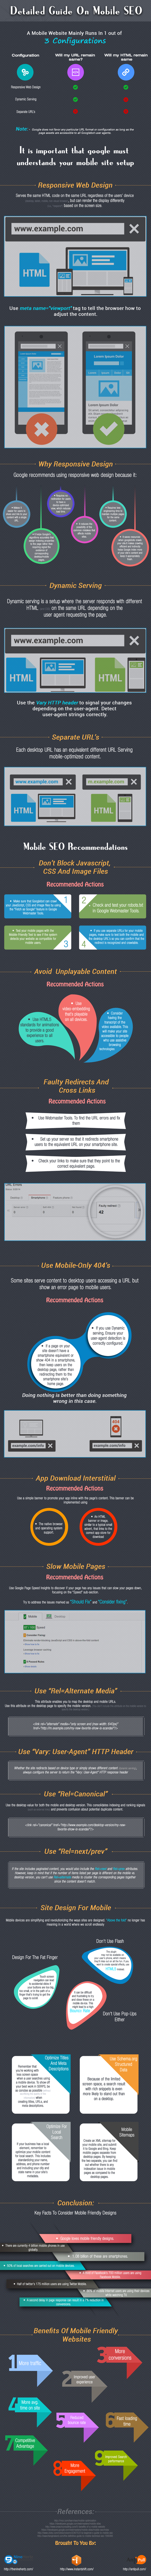 Detailed-Guide-on-Mobile-SEO